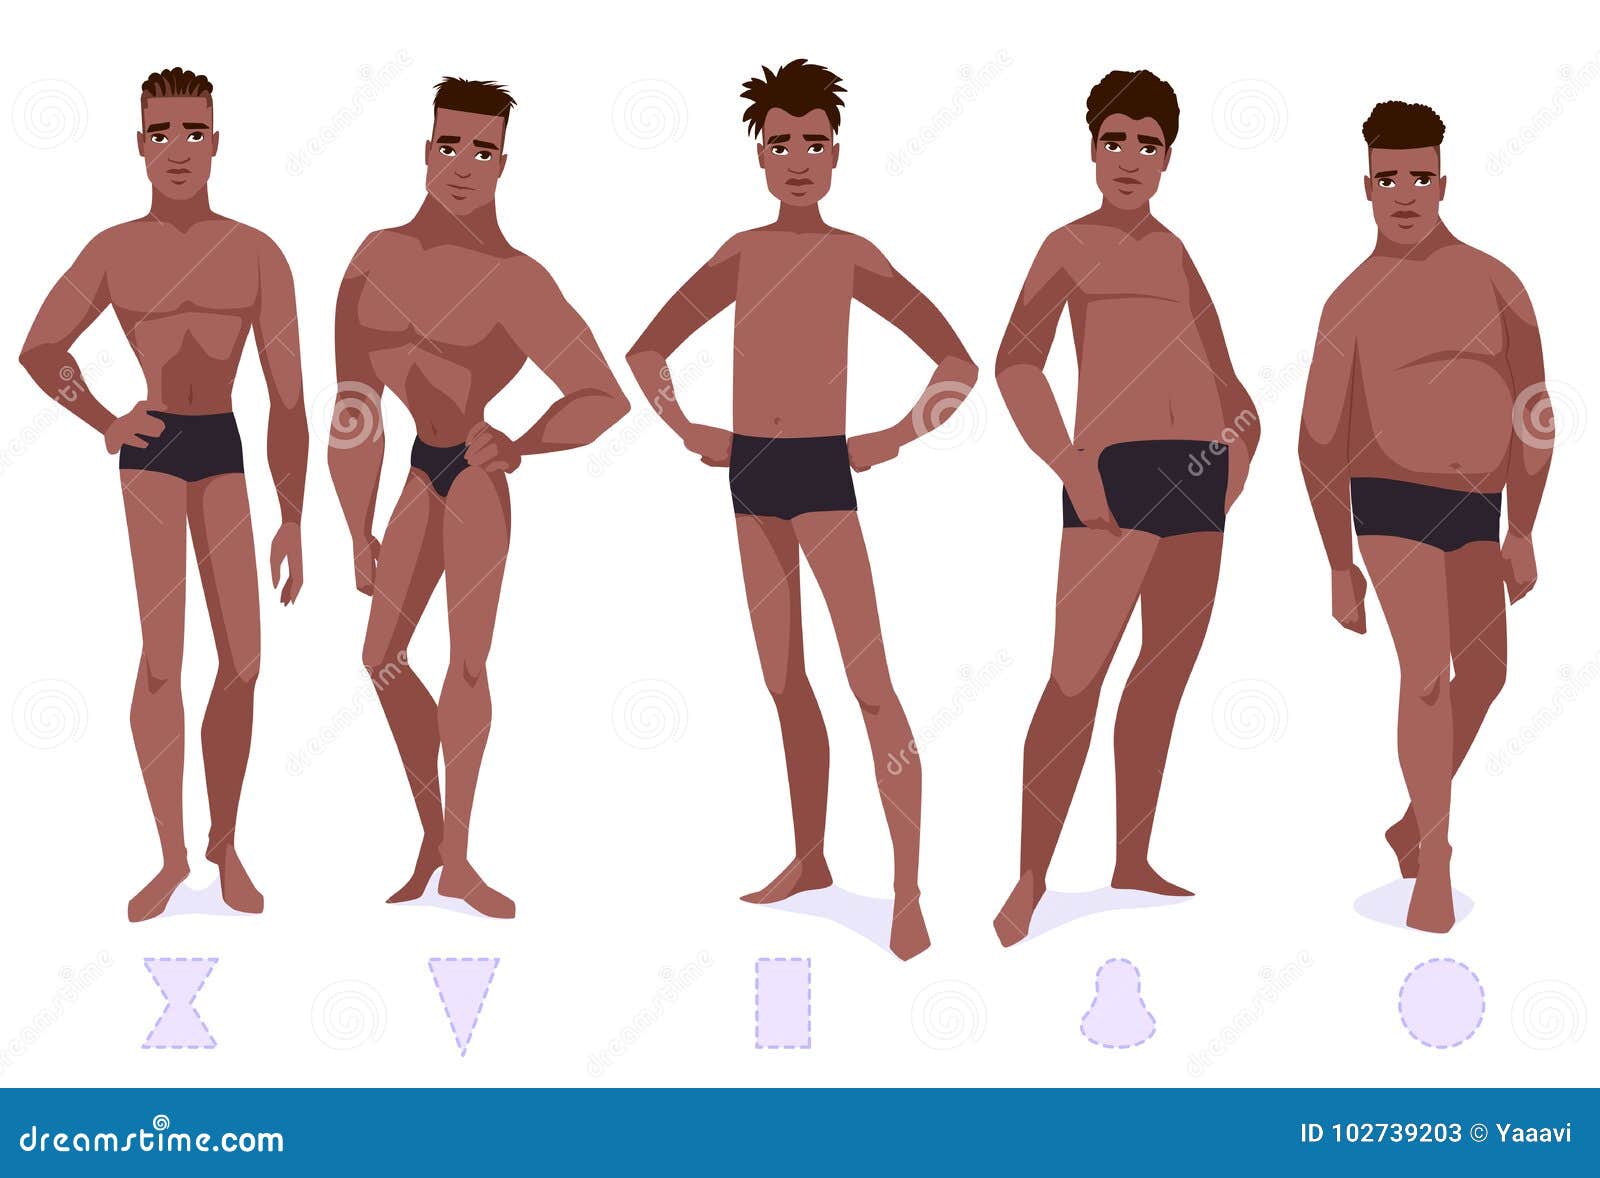 Male Body Types Pictures  Men's Body Shapes Images